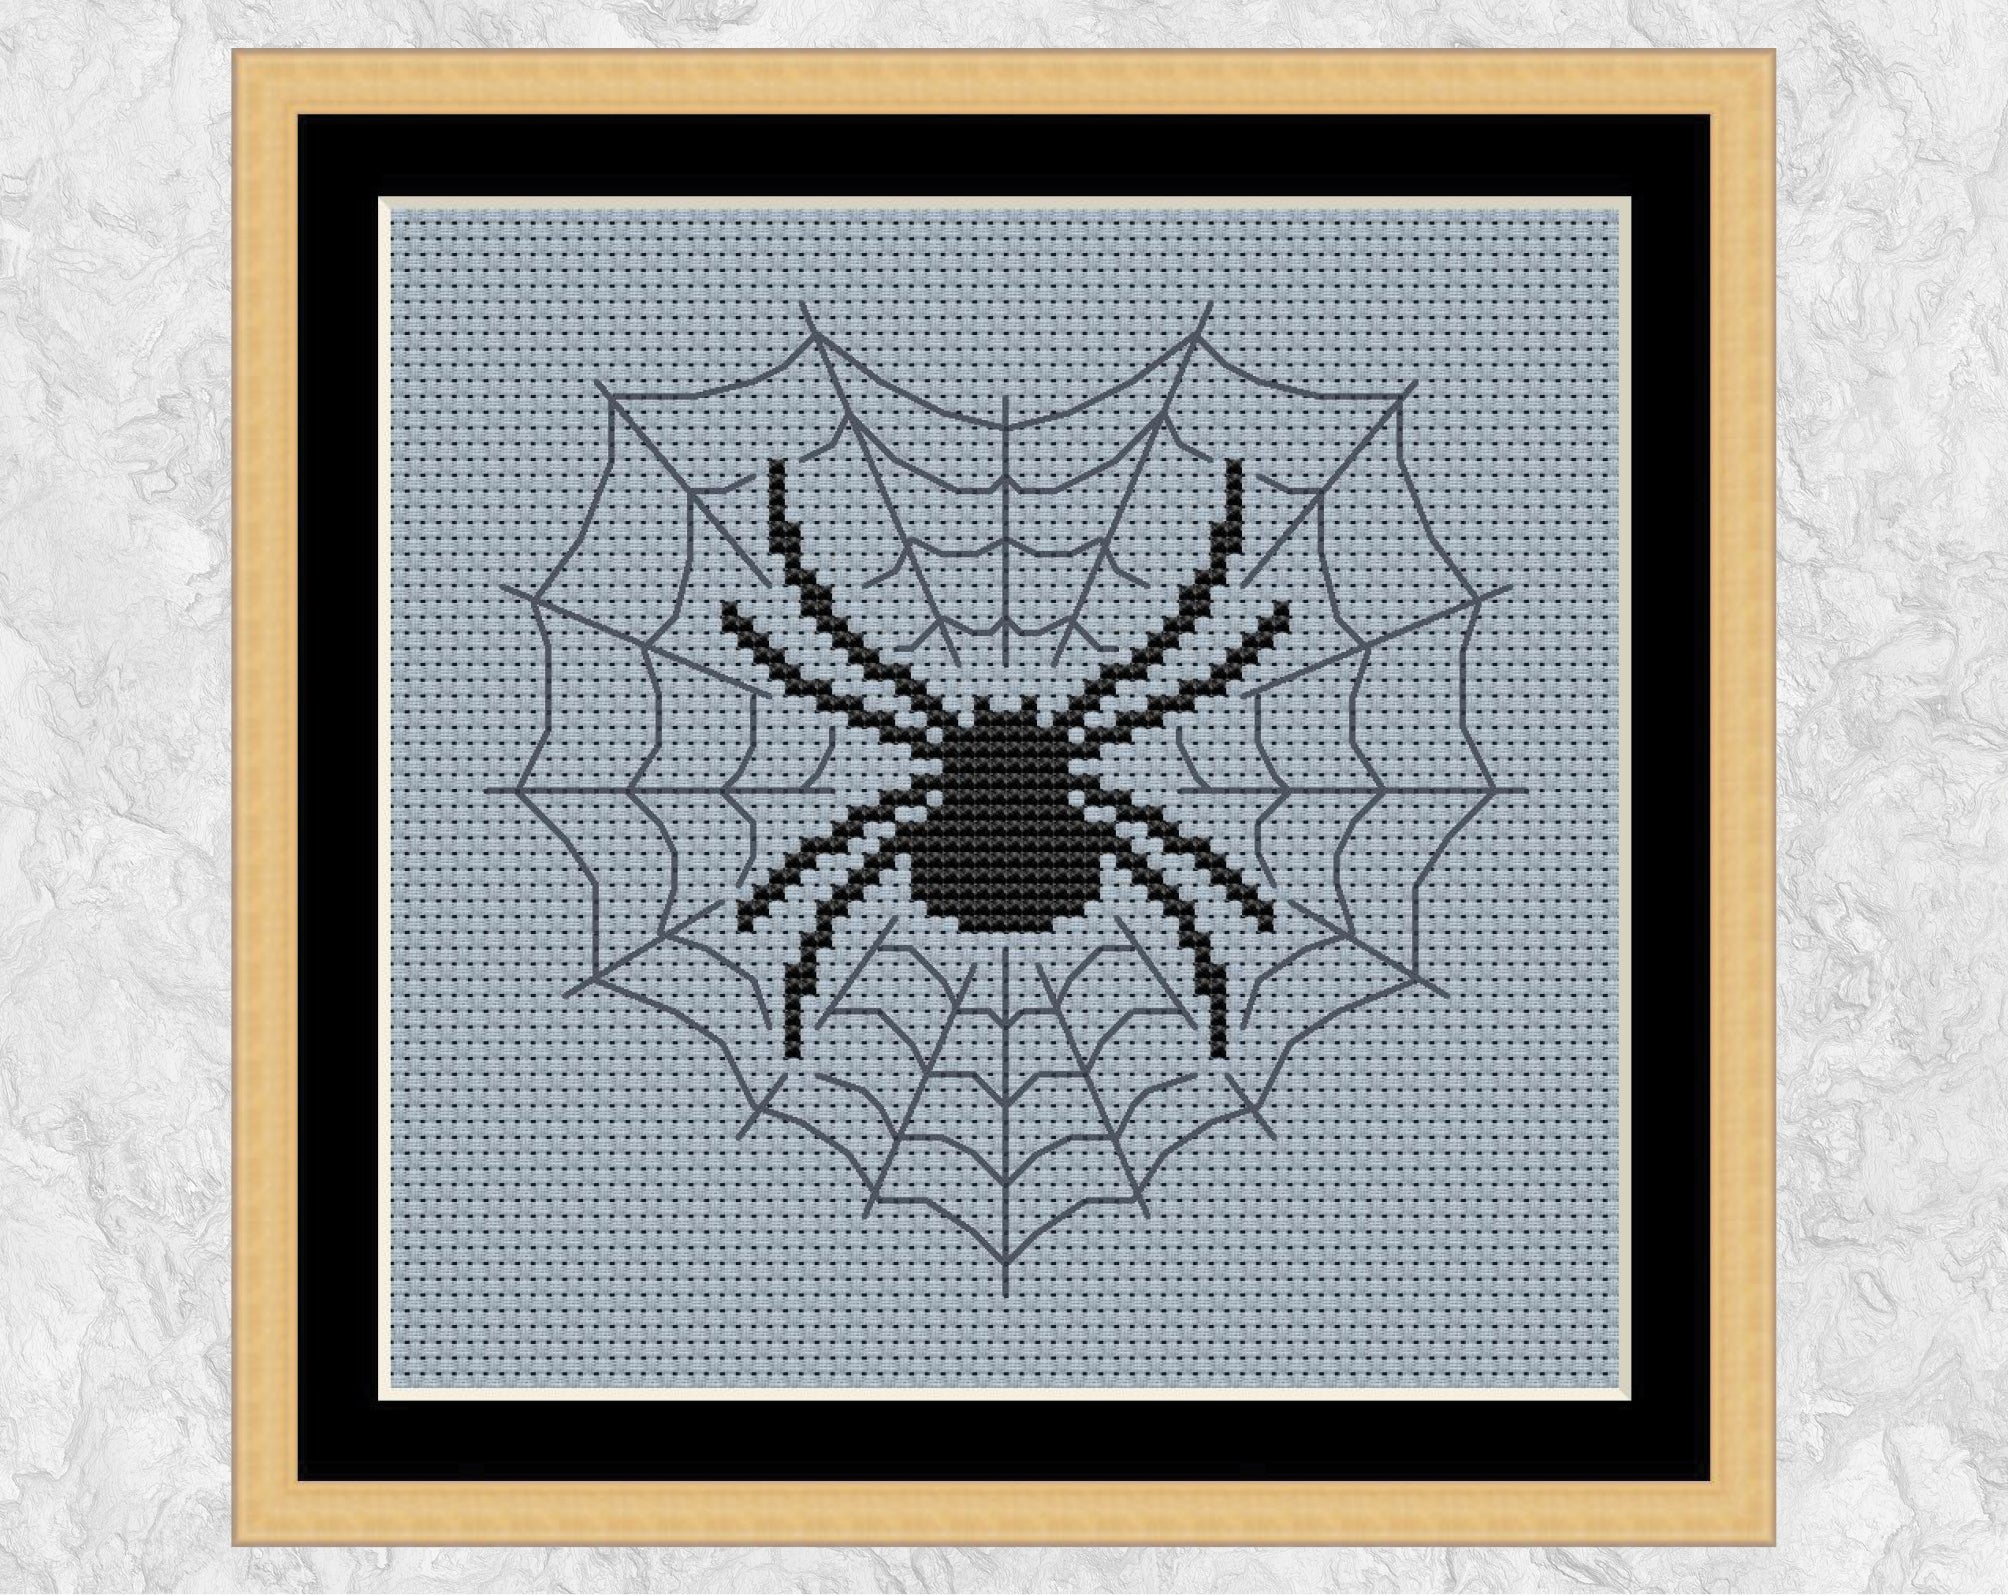 A Spider's Heart cross stitch pattern. A large spider in a heart-shaped web. Shown with frame.